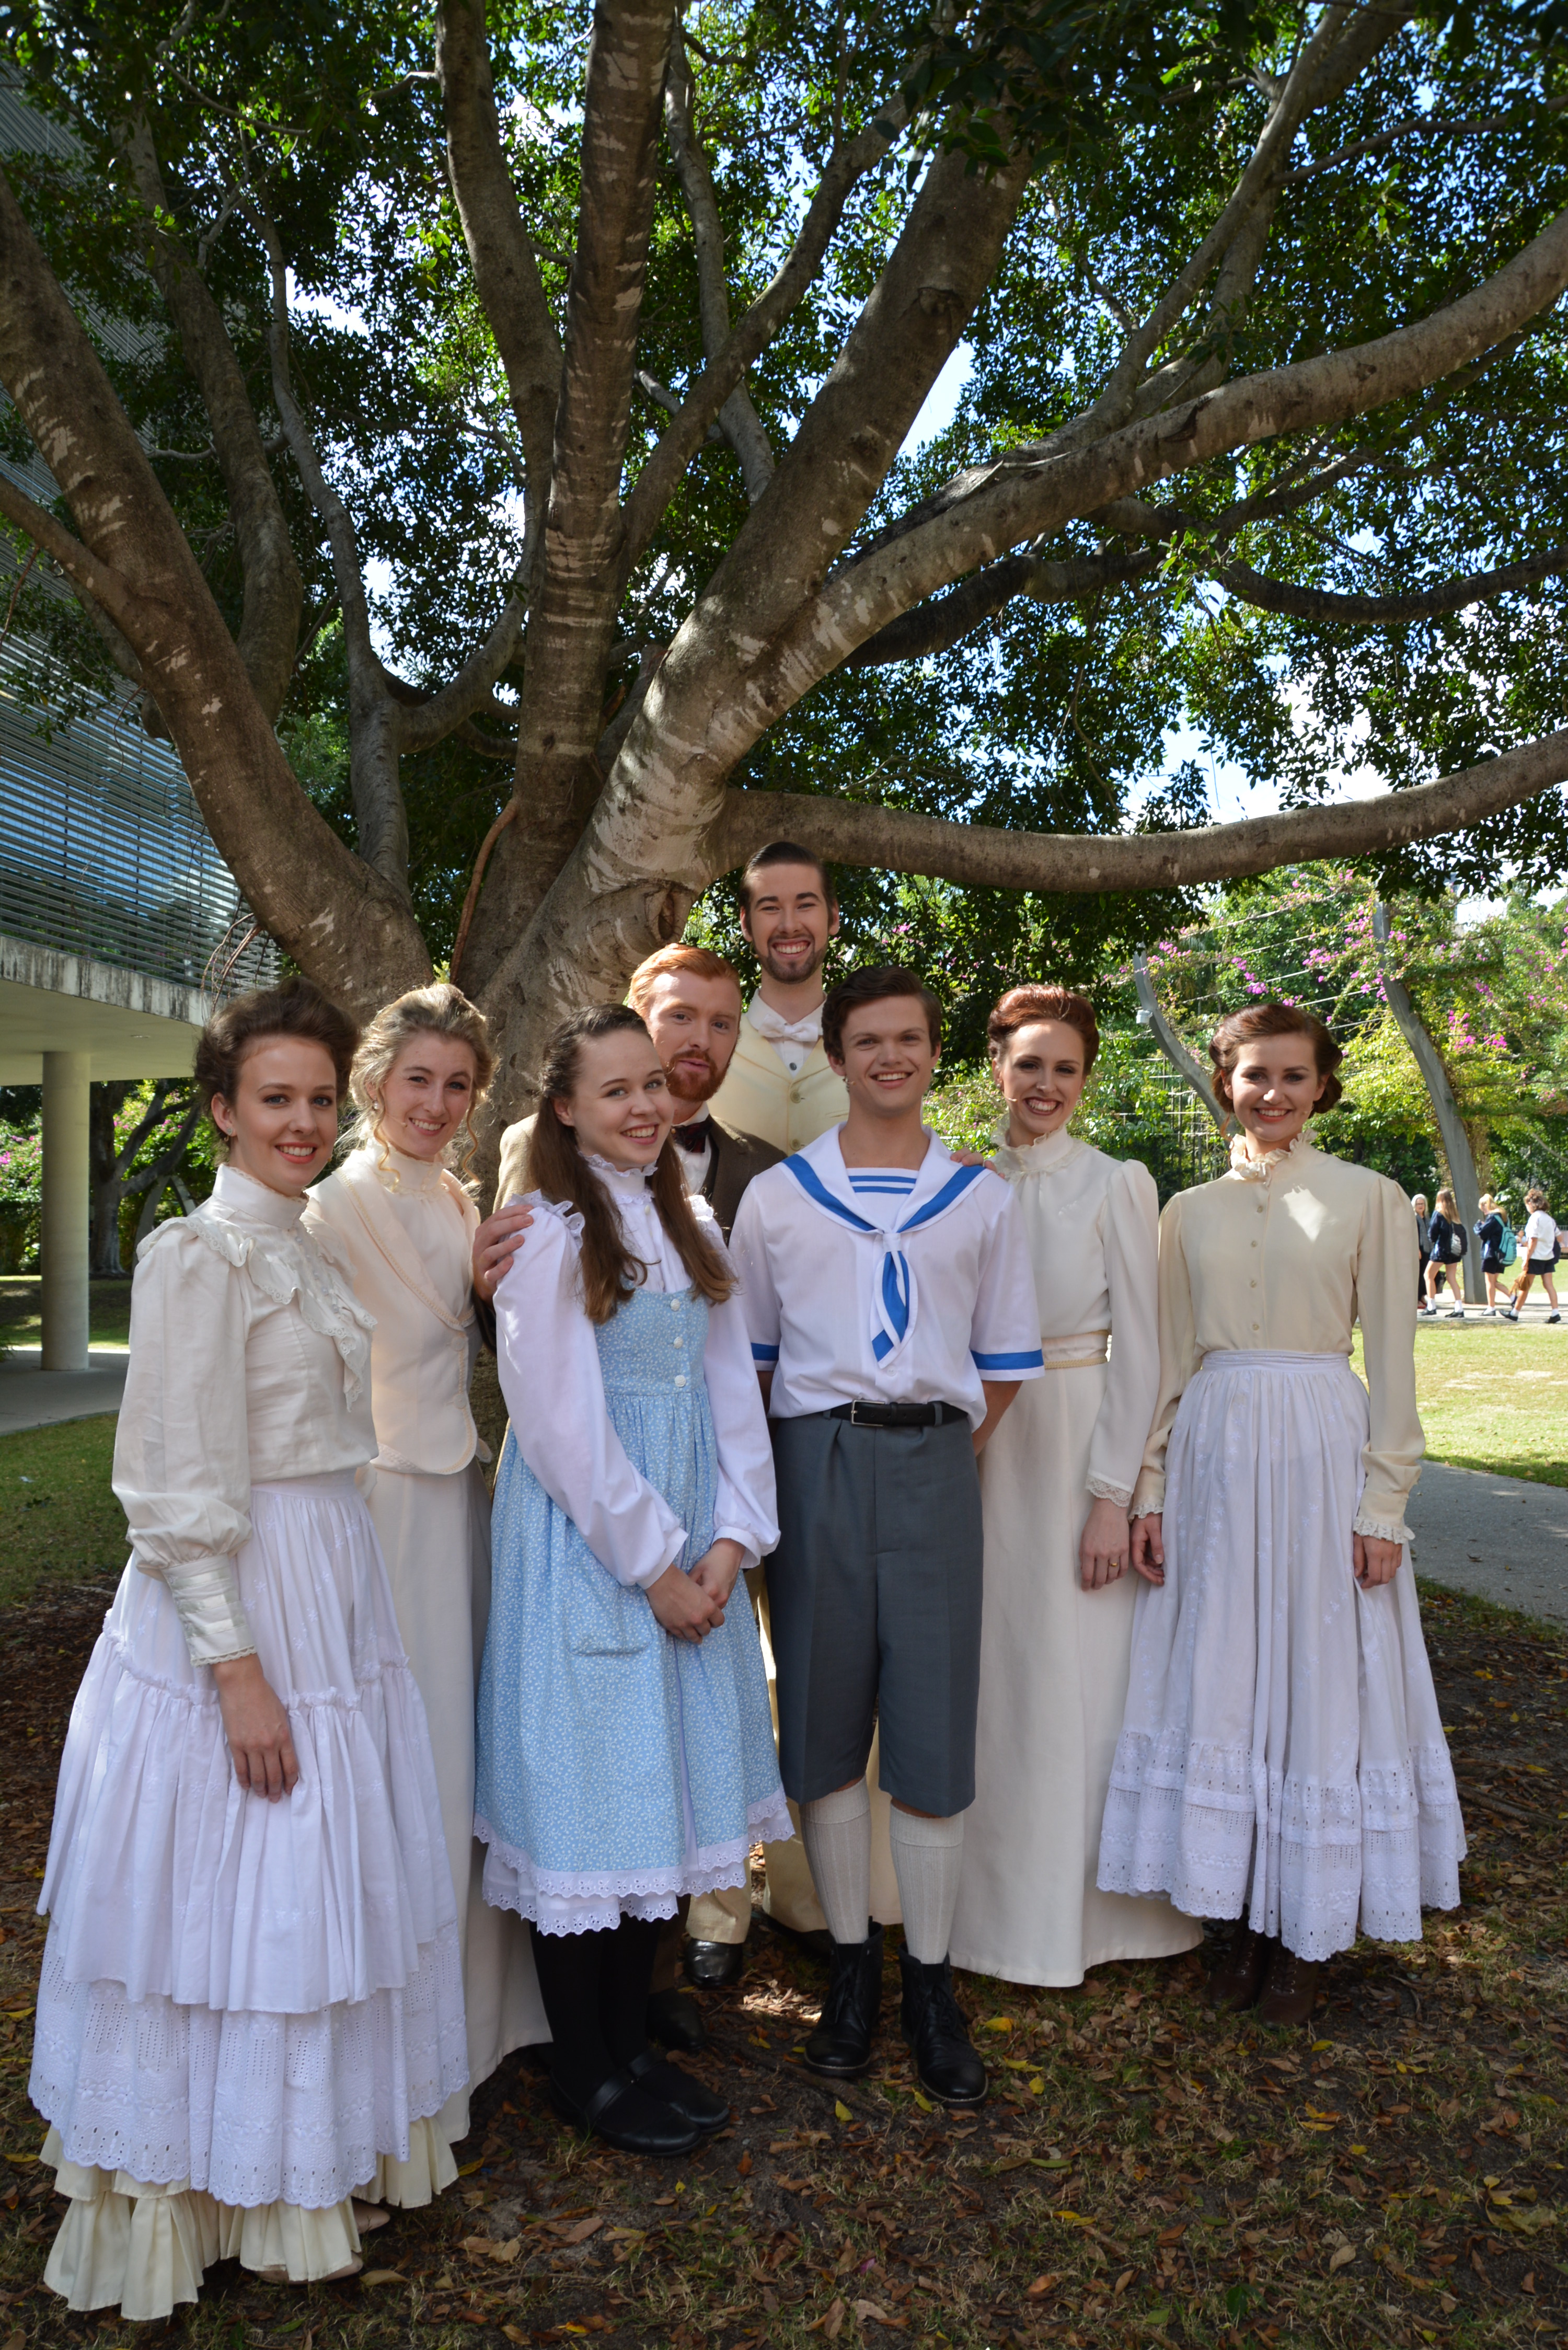 The Secret Garden cast from the triple-threat Musical Theatre